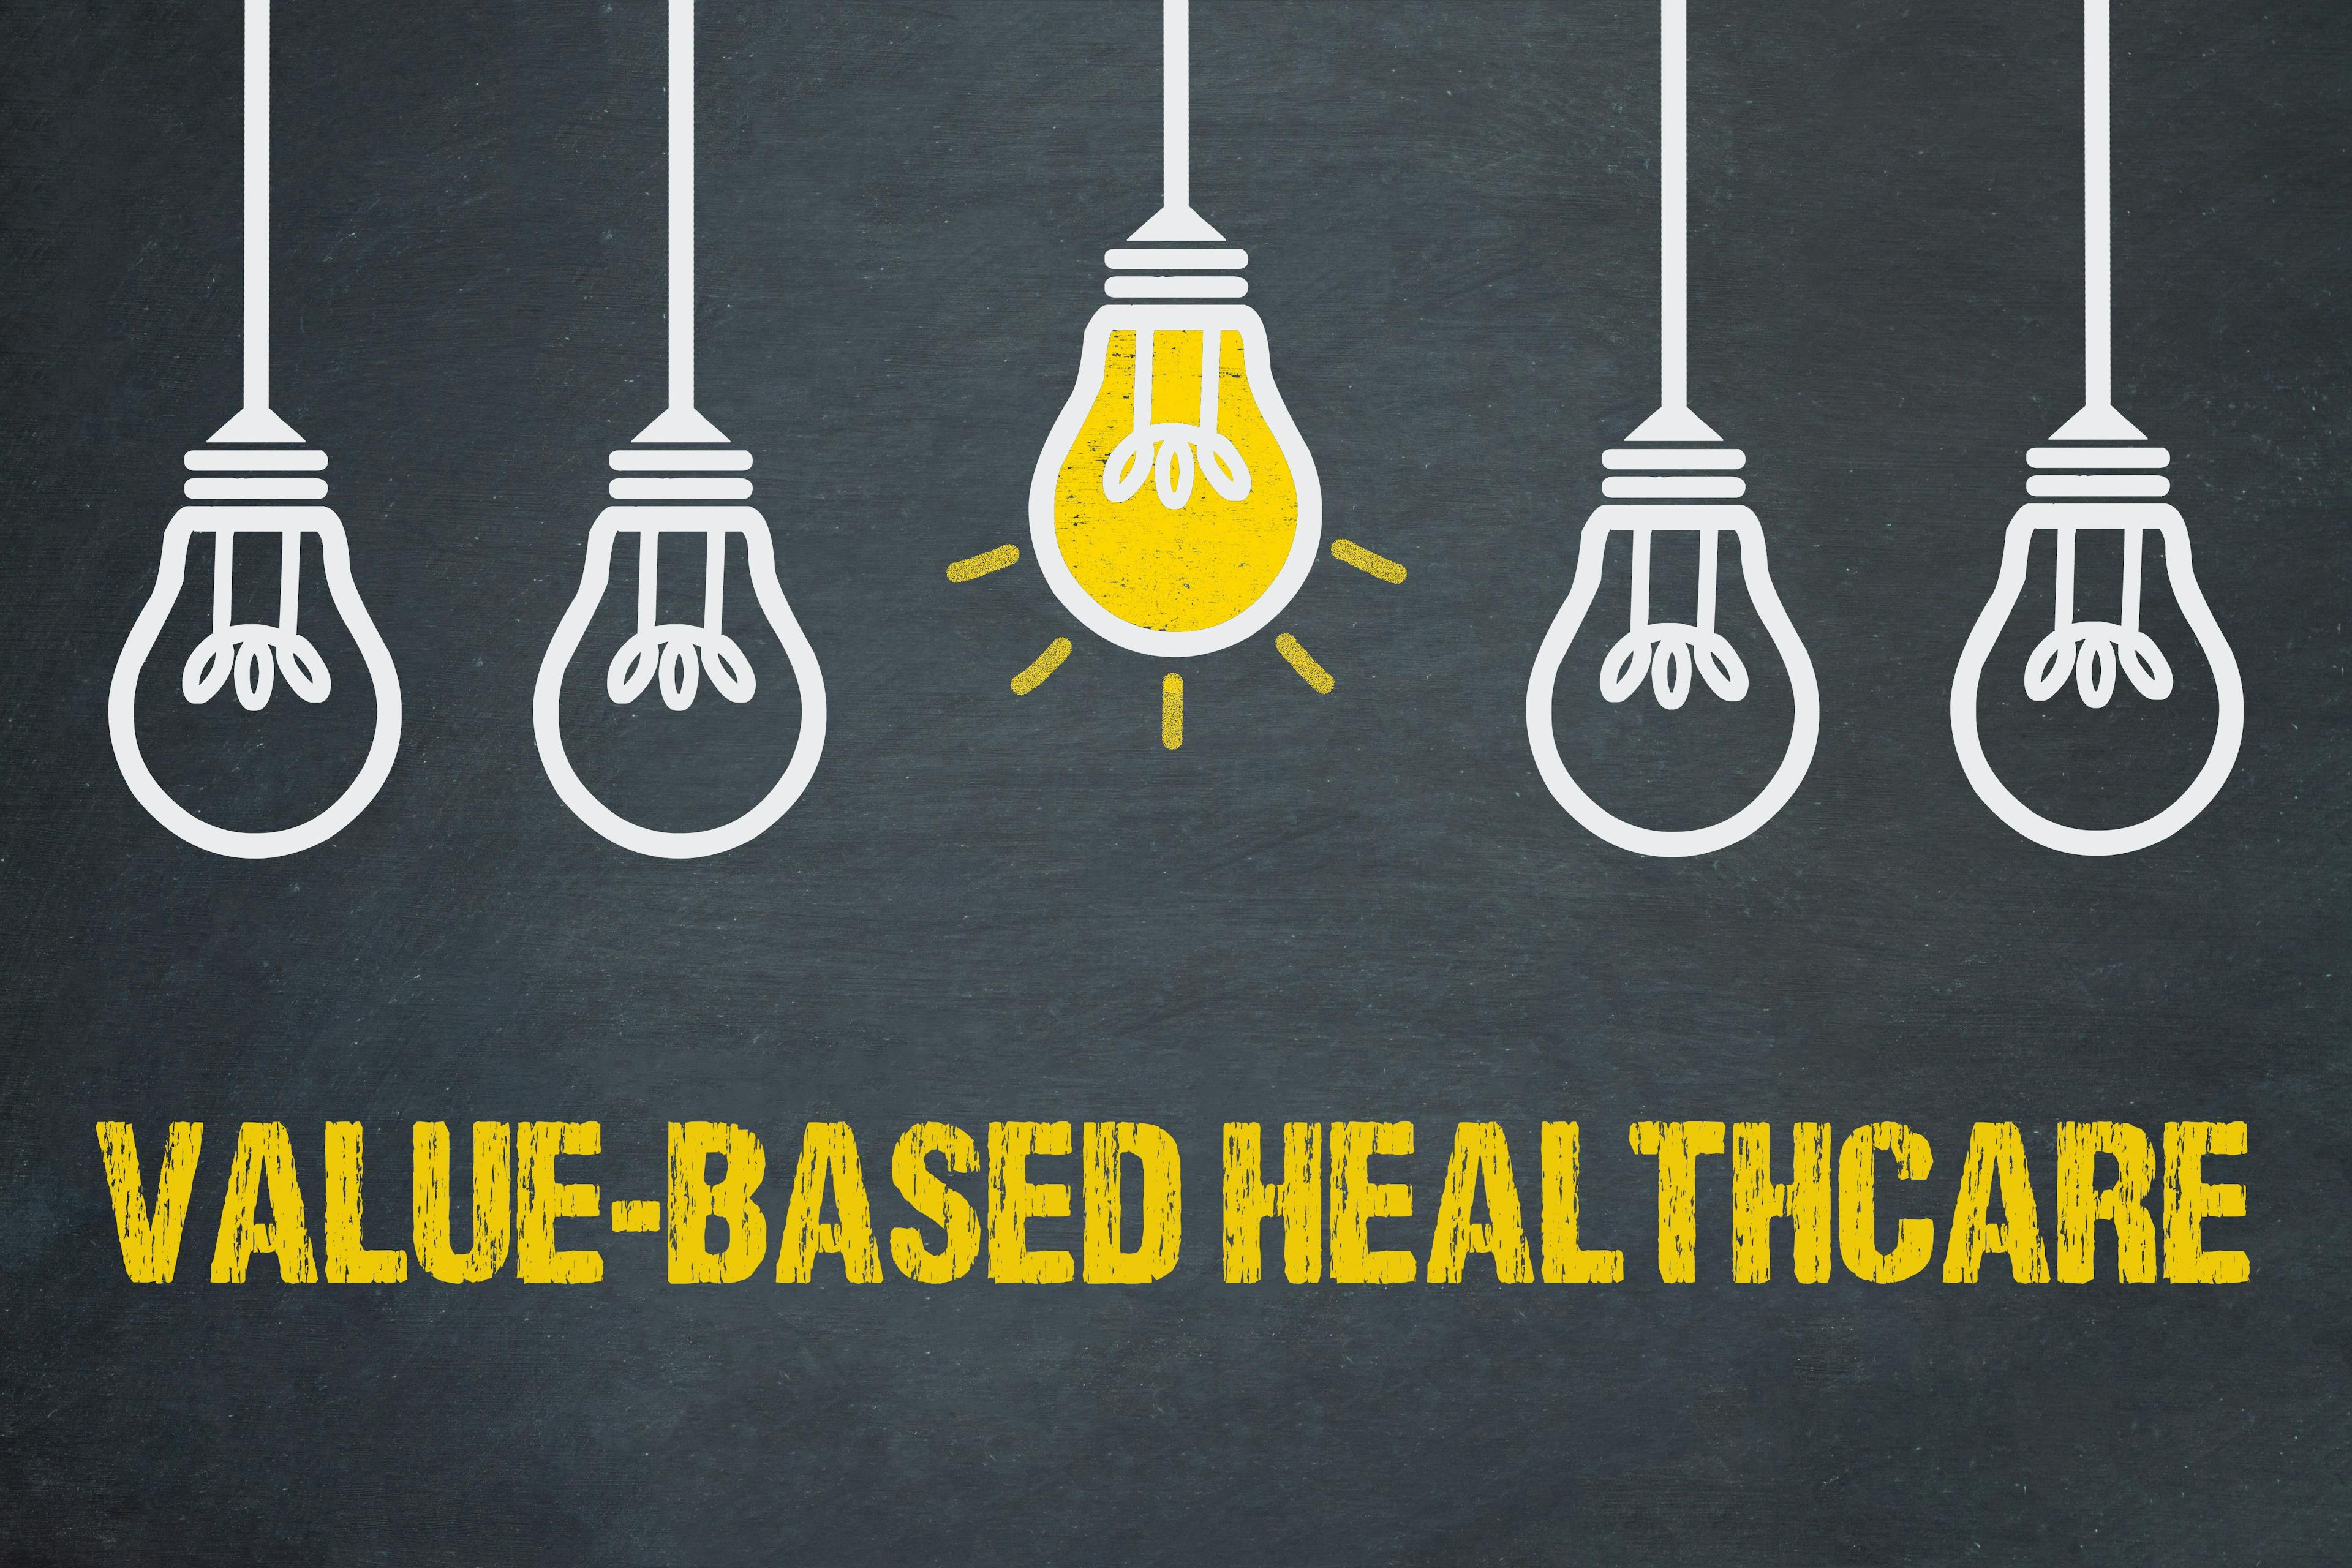 value based healthcare | © magele-picture - stock.adobe.com